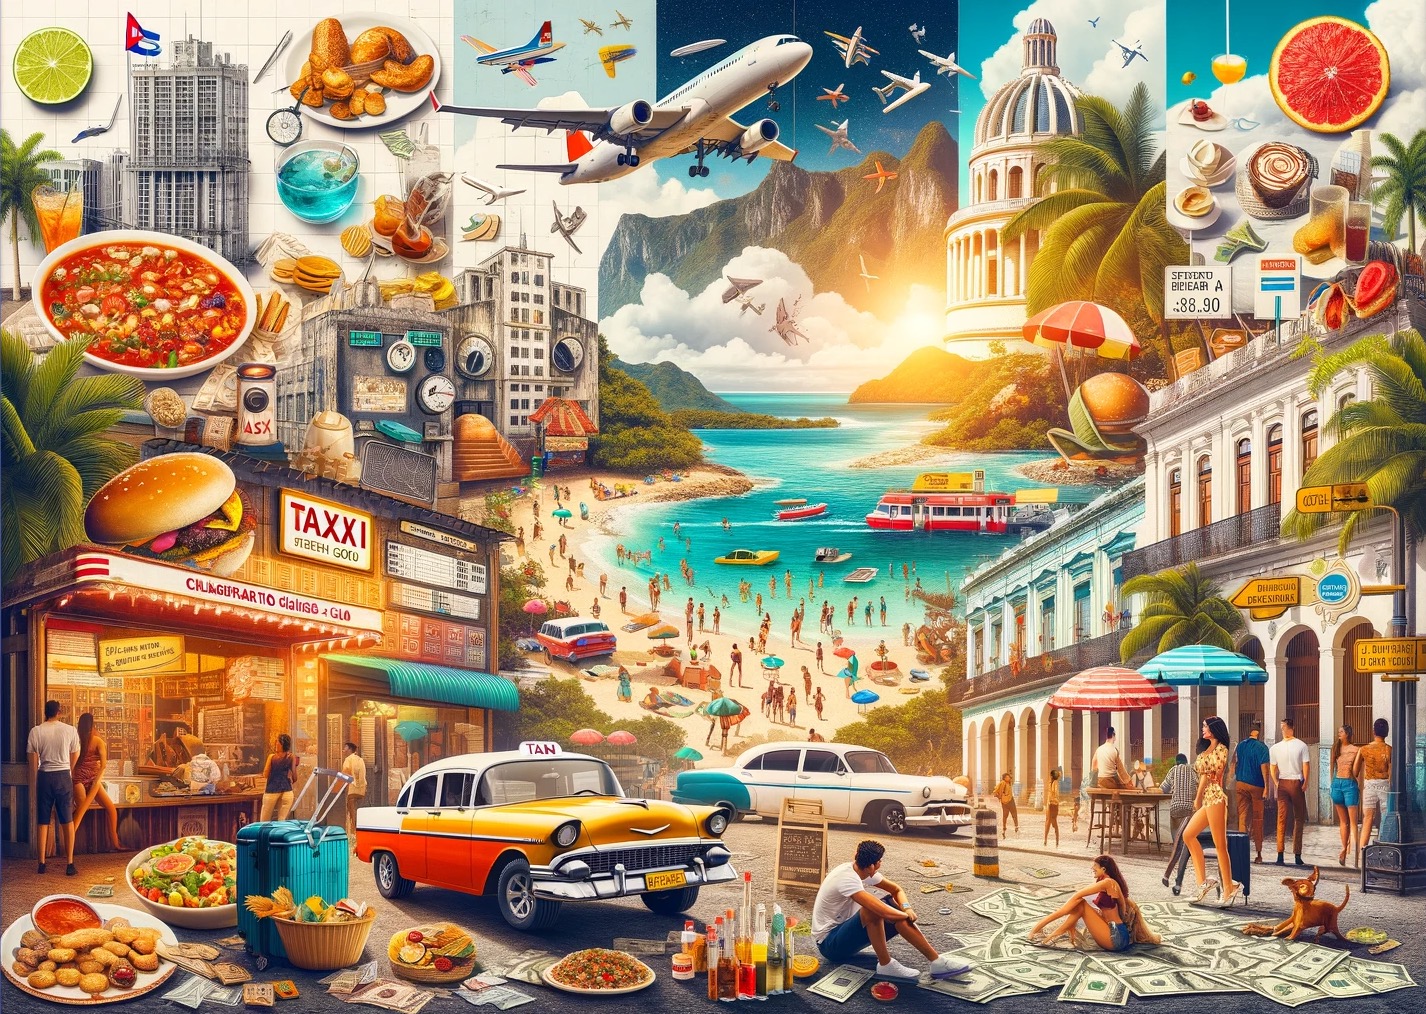 Vibrant beach cityscape with food, culture, and transportation.